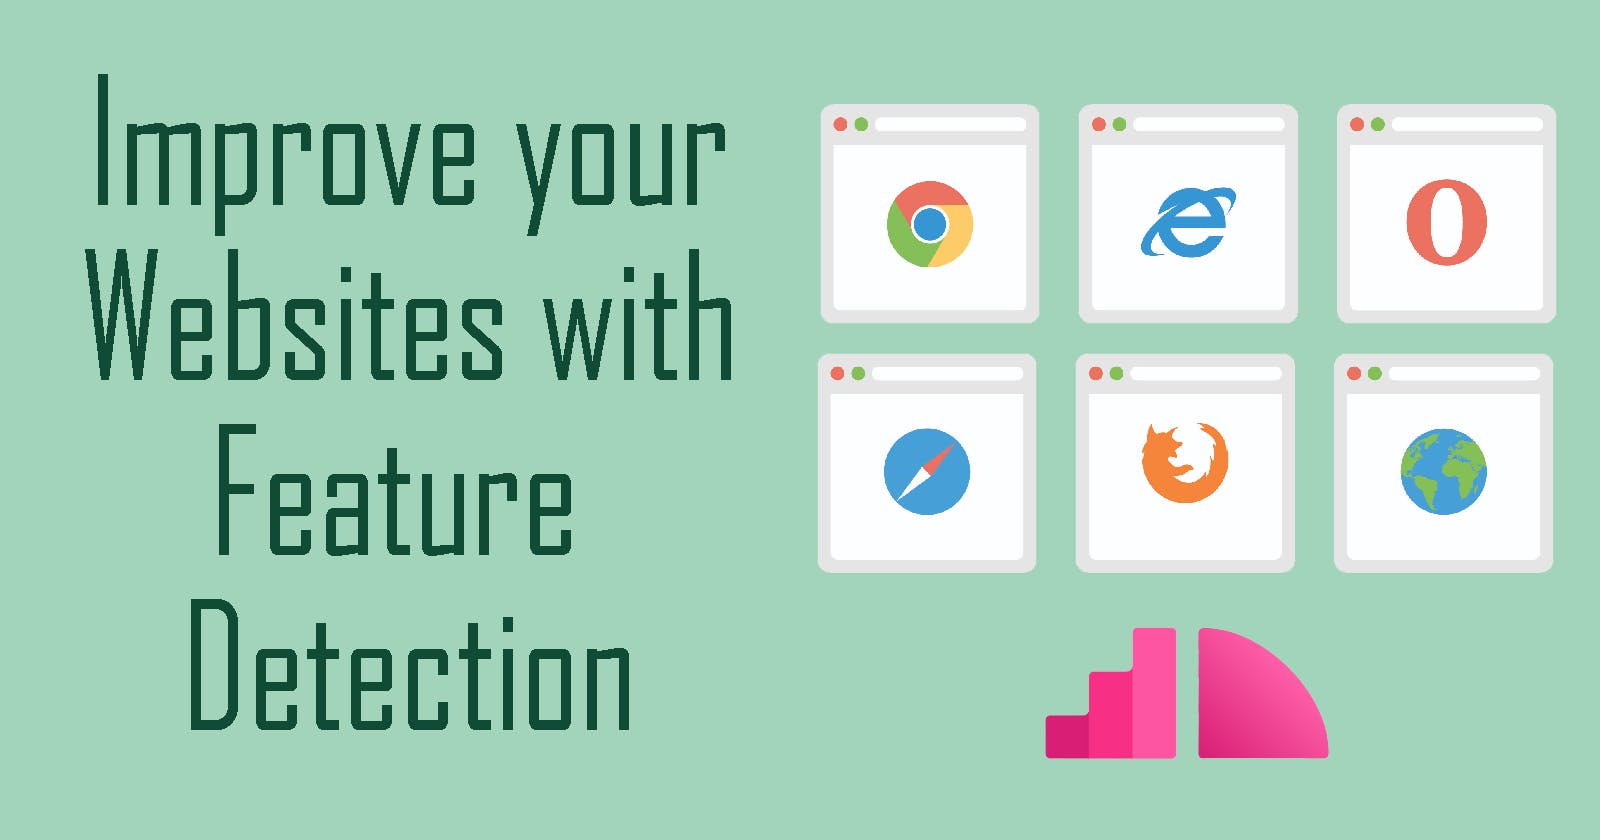 Improve your Websites with Feature Detection